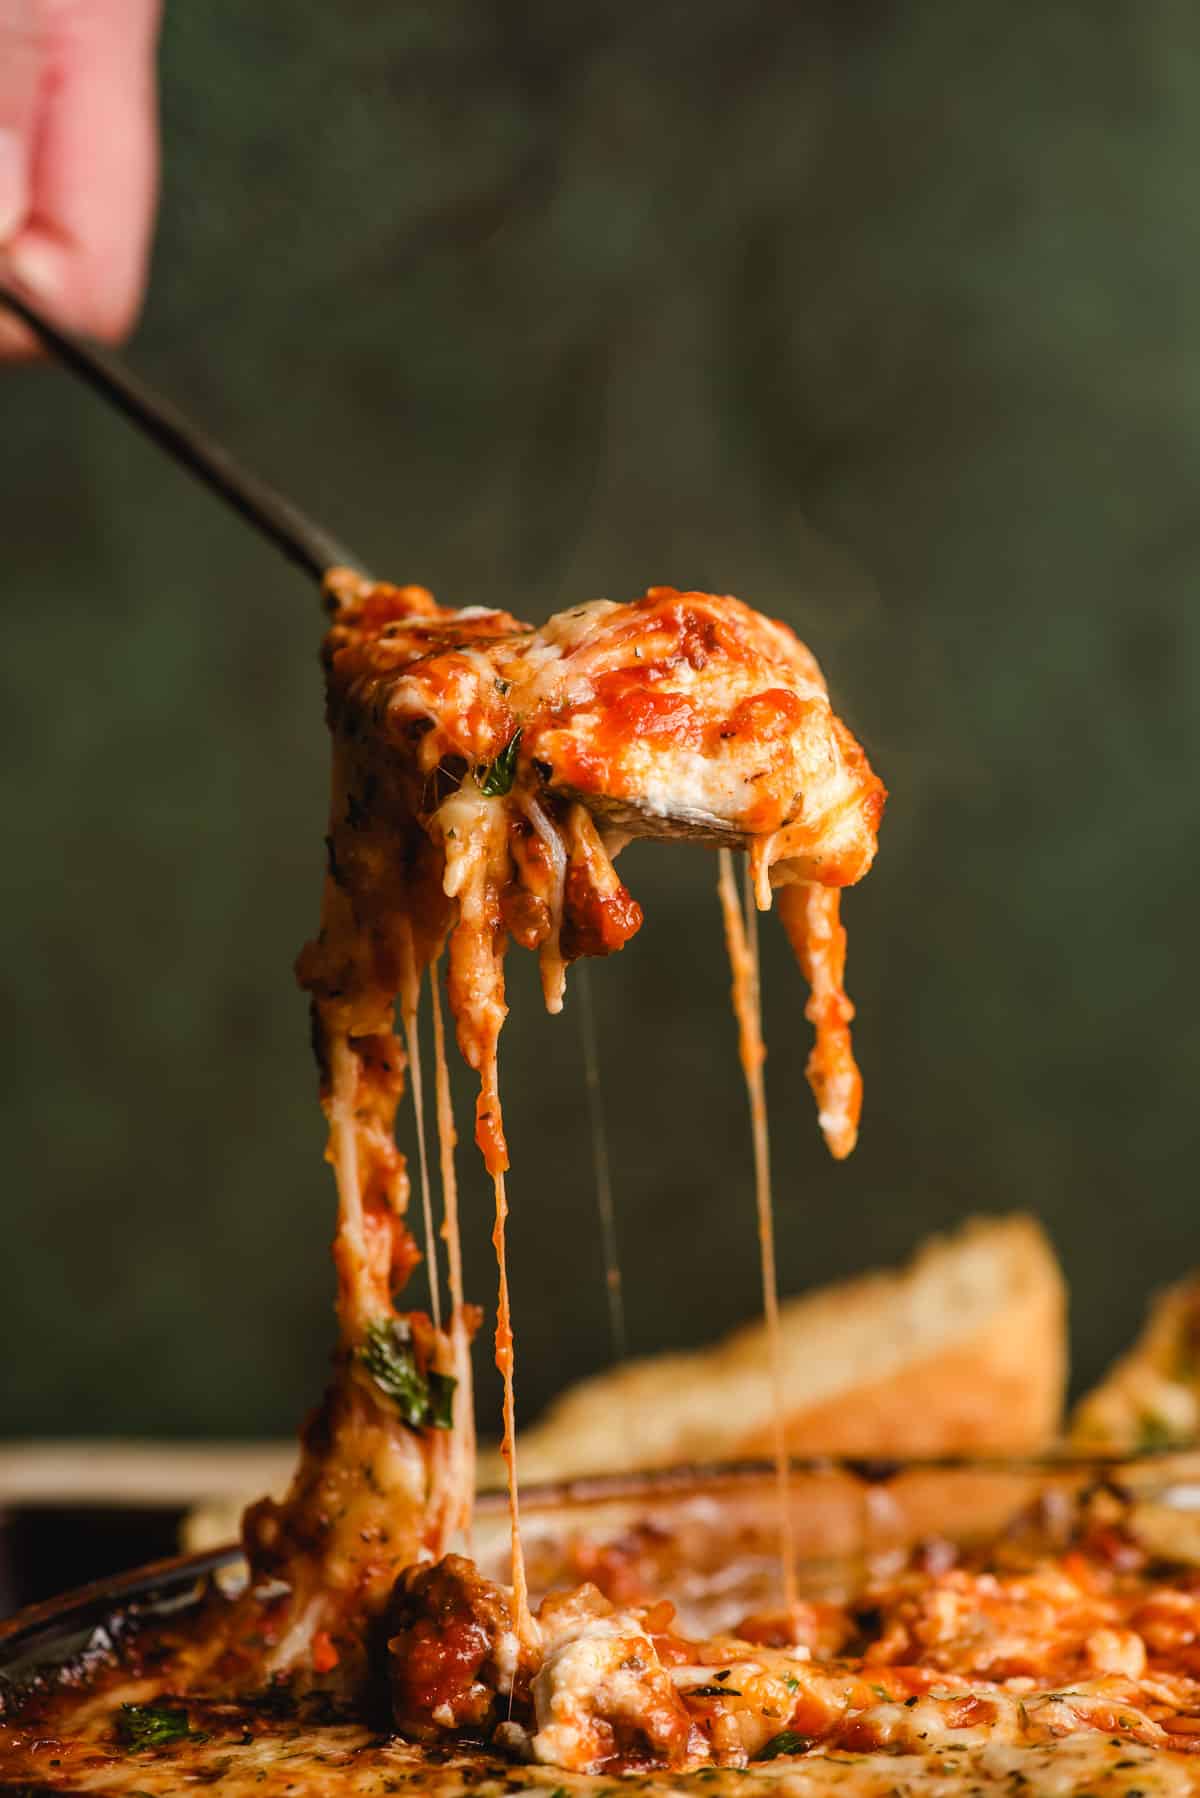 Spoon pulling a scoopful of lasagna dip from a dish, with strings of cheese trailing behind it.